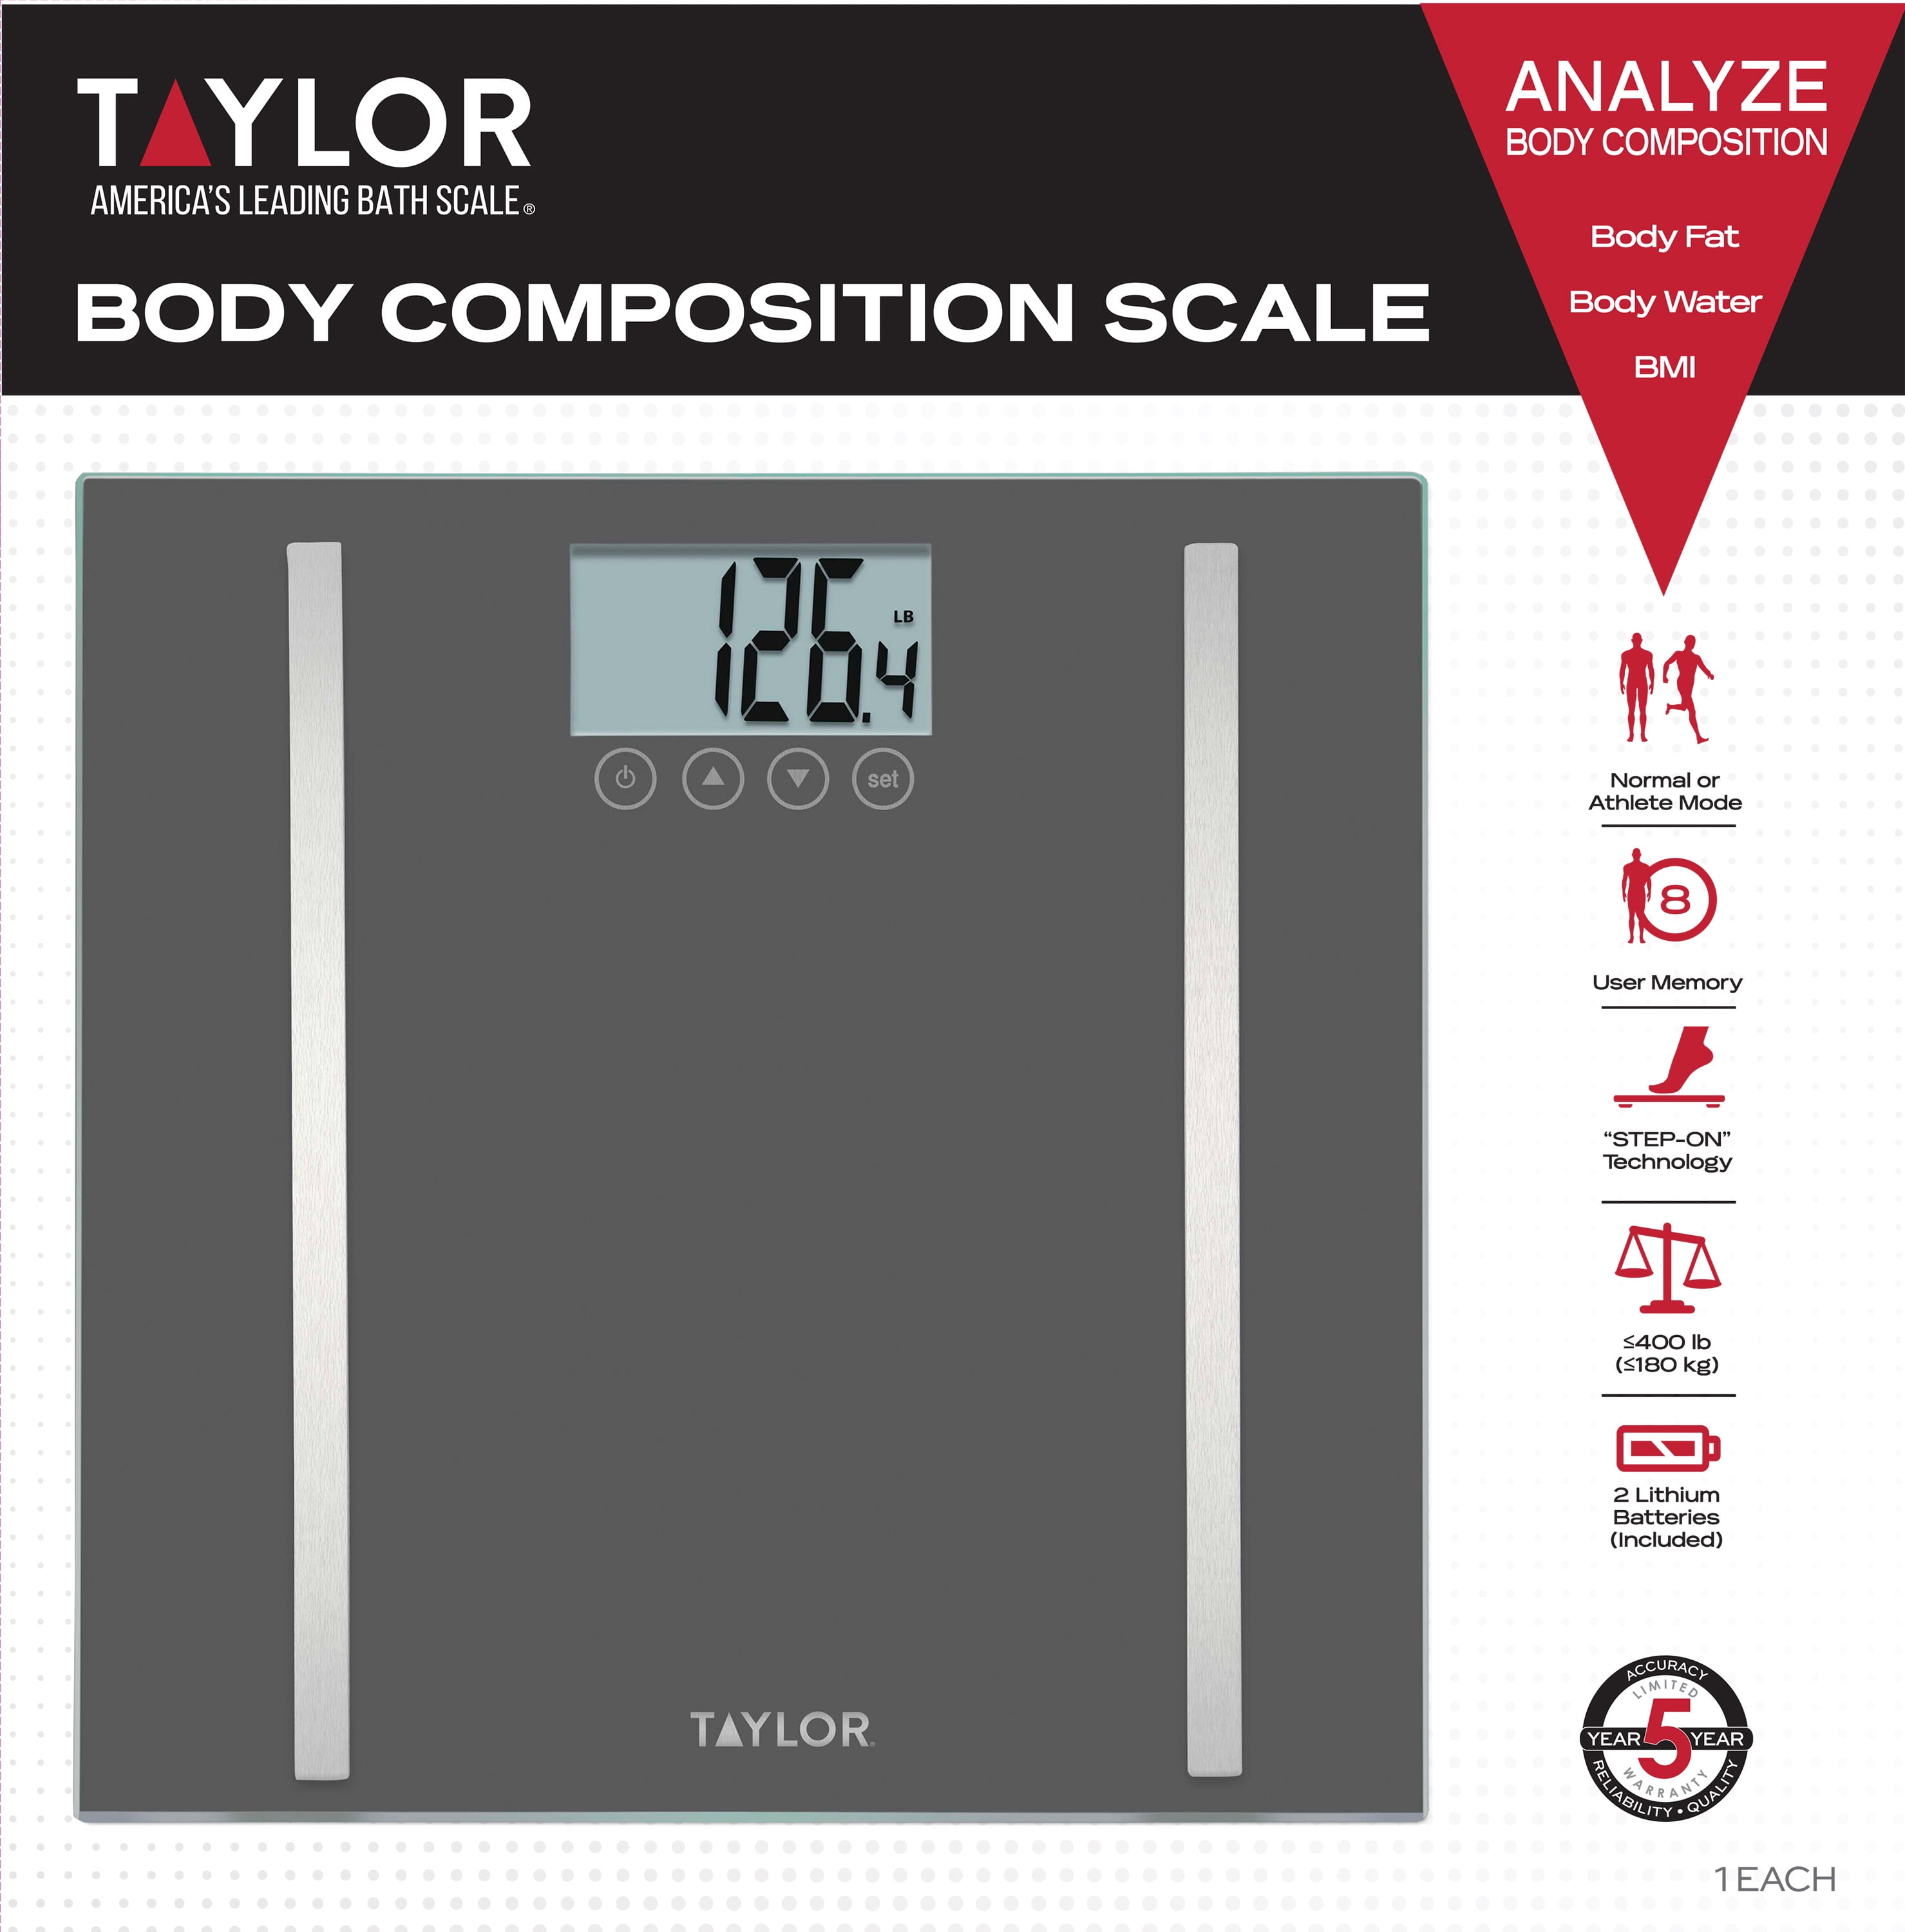 Body Composition Scale with Body Fat, Body Water and Muscle Mass + BMI –  Taylor USA